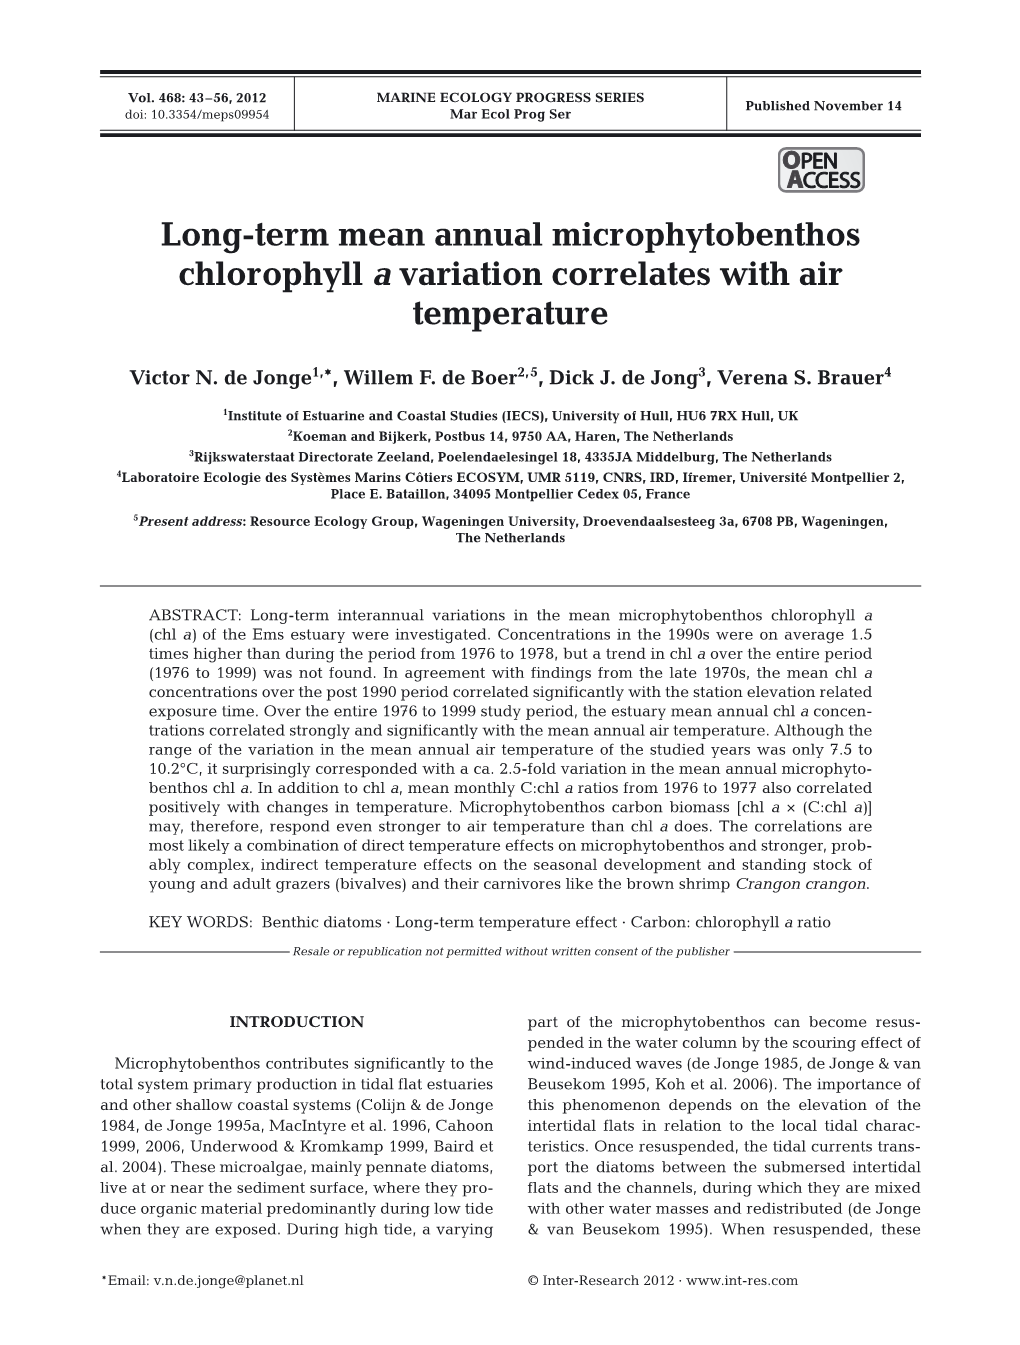 Long-Term Mean Annual Microphytobenthos Chlorophyll a Variation Correlates with Air Temperature